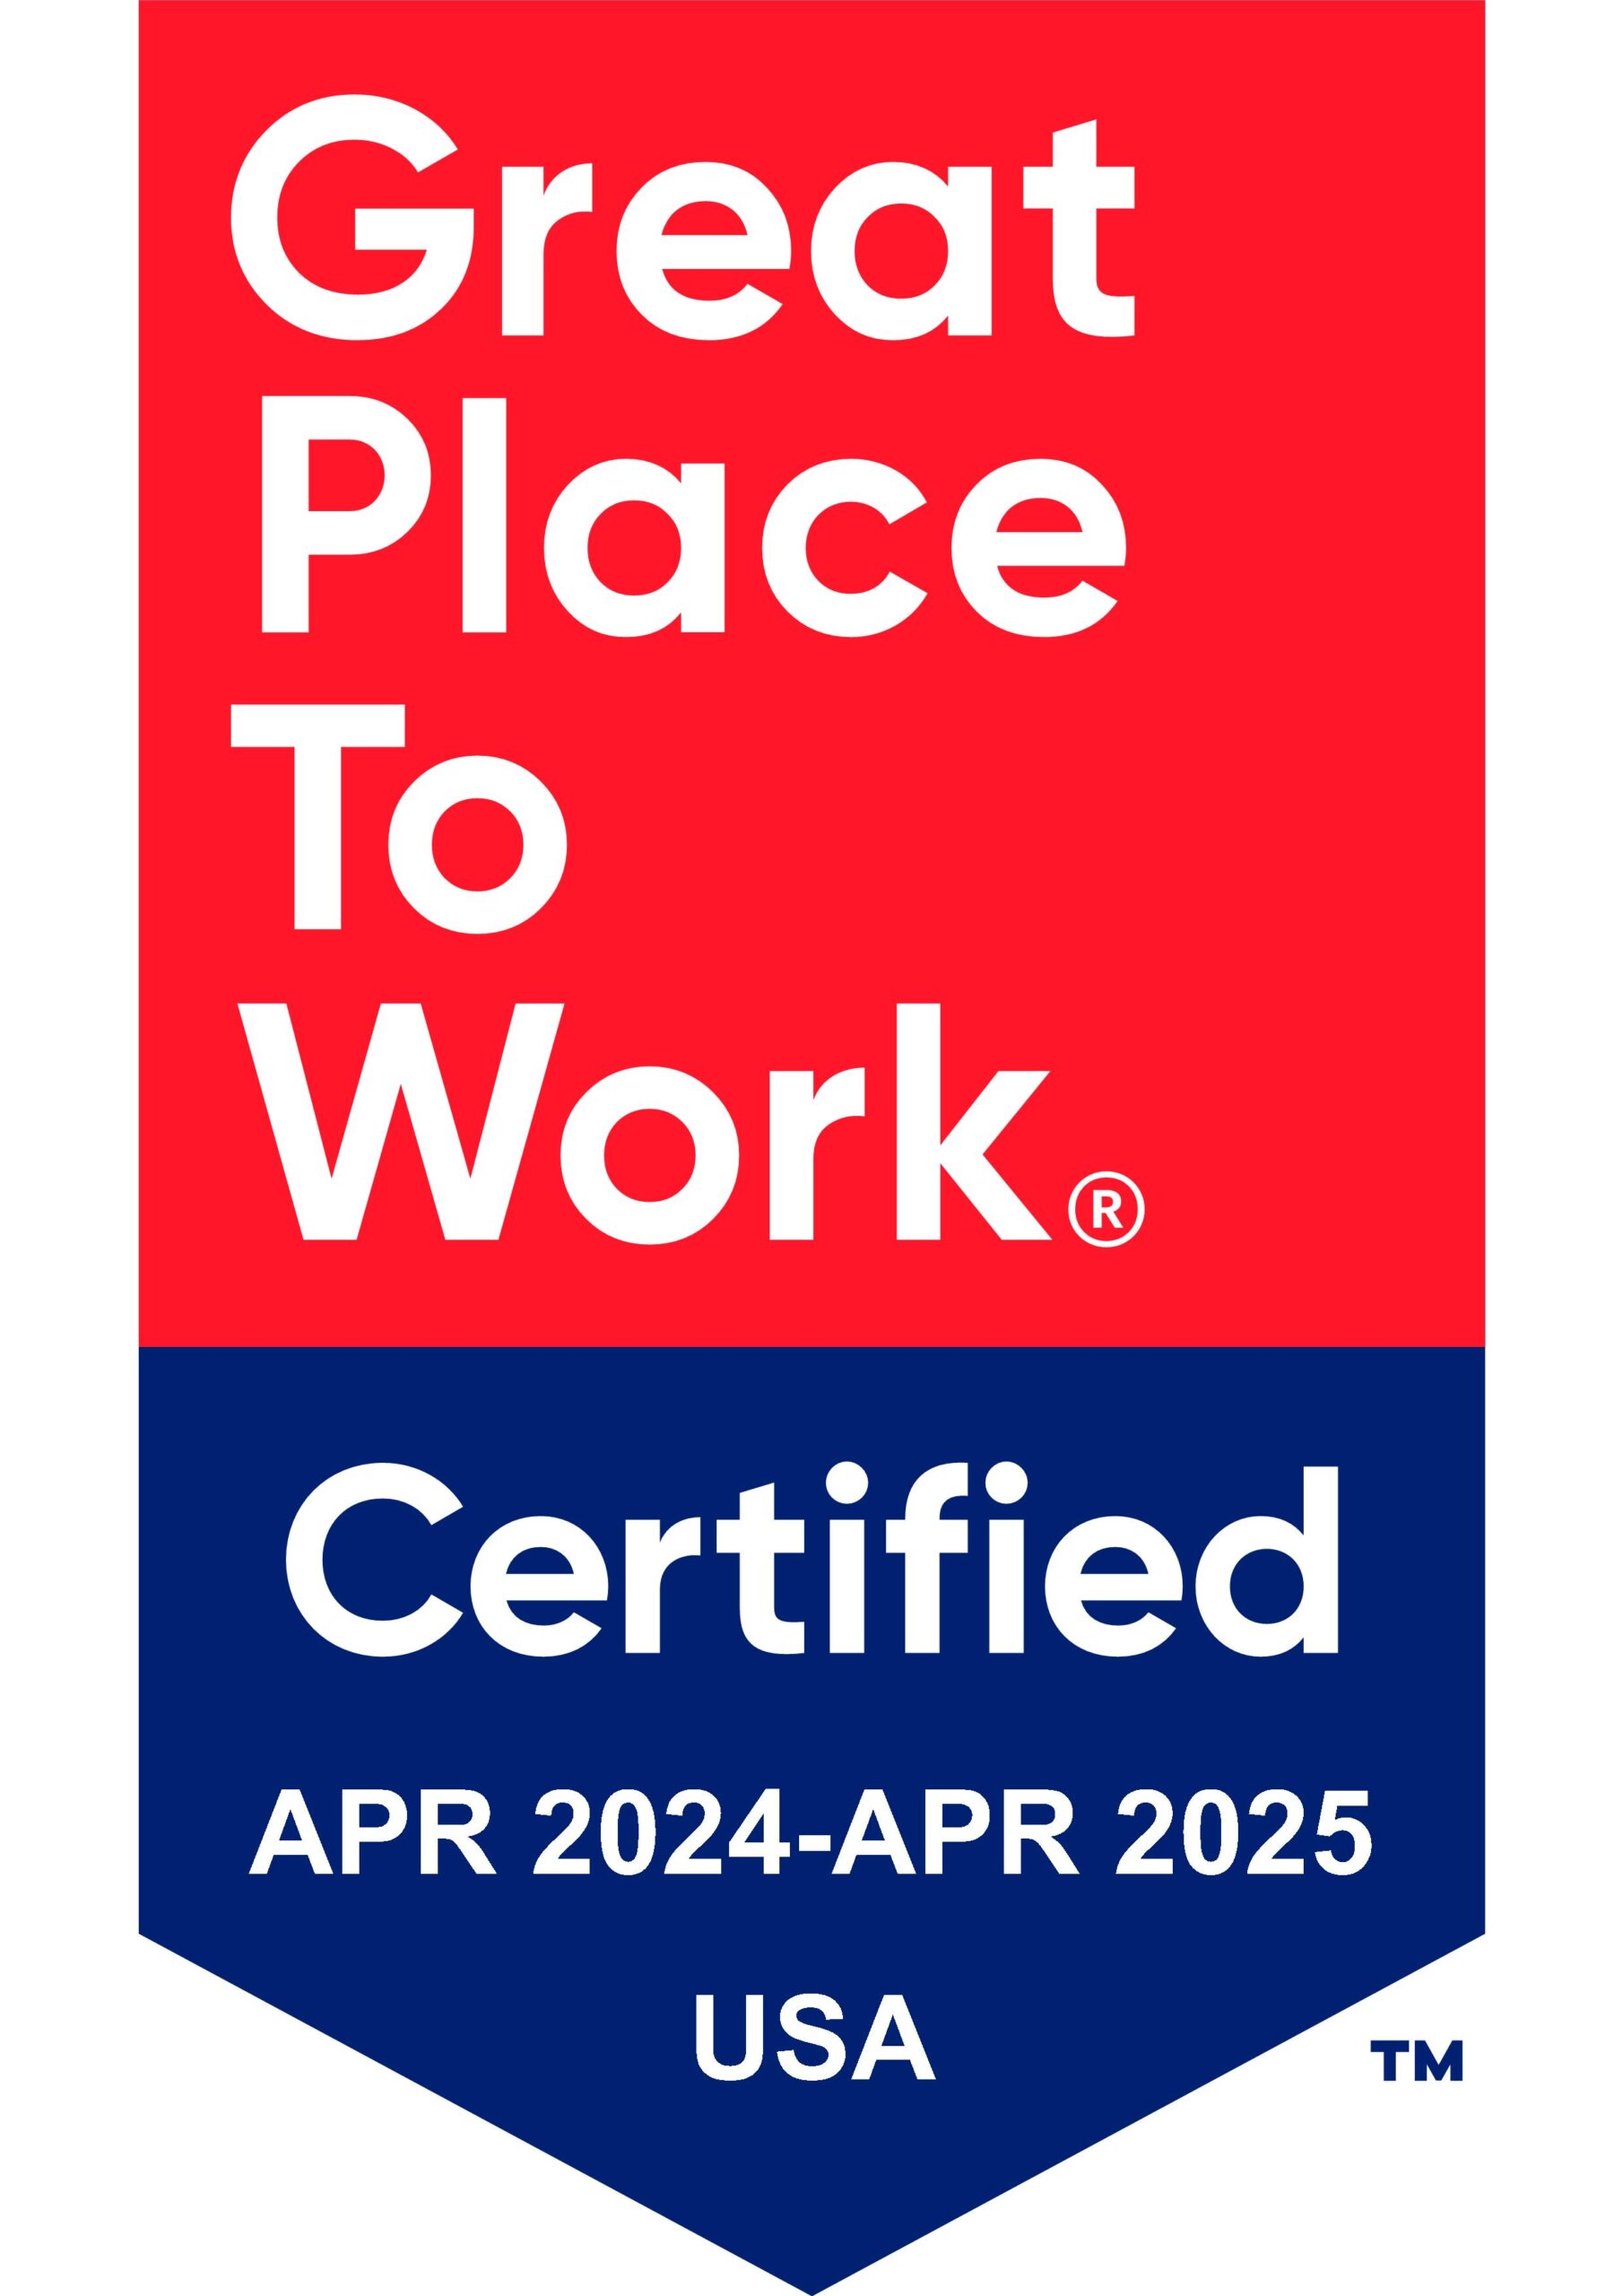  Great place to work certified April 2024 - April 2025